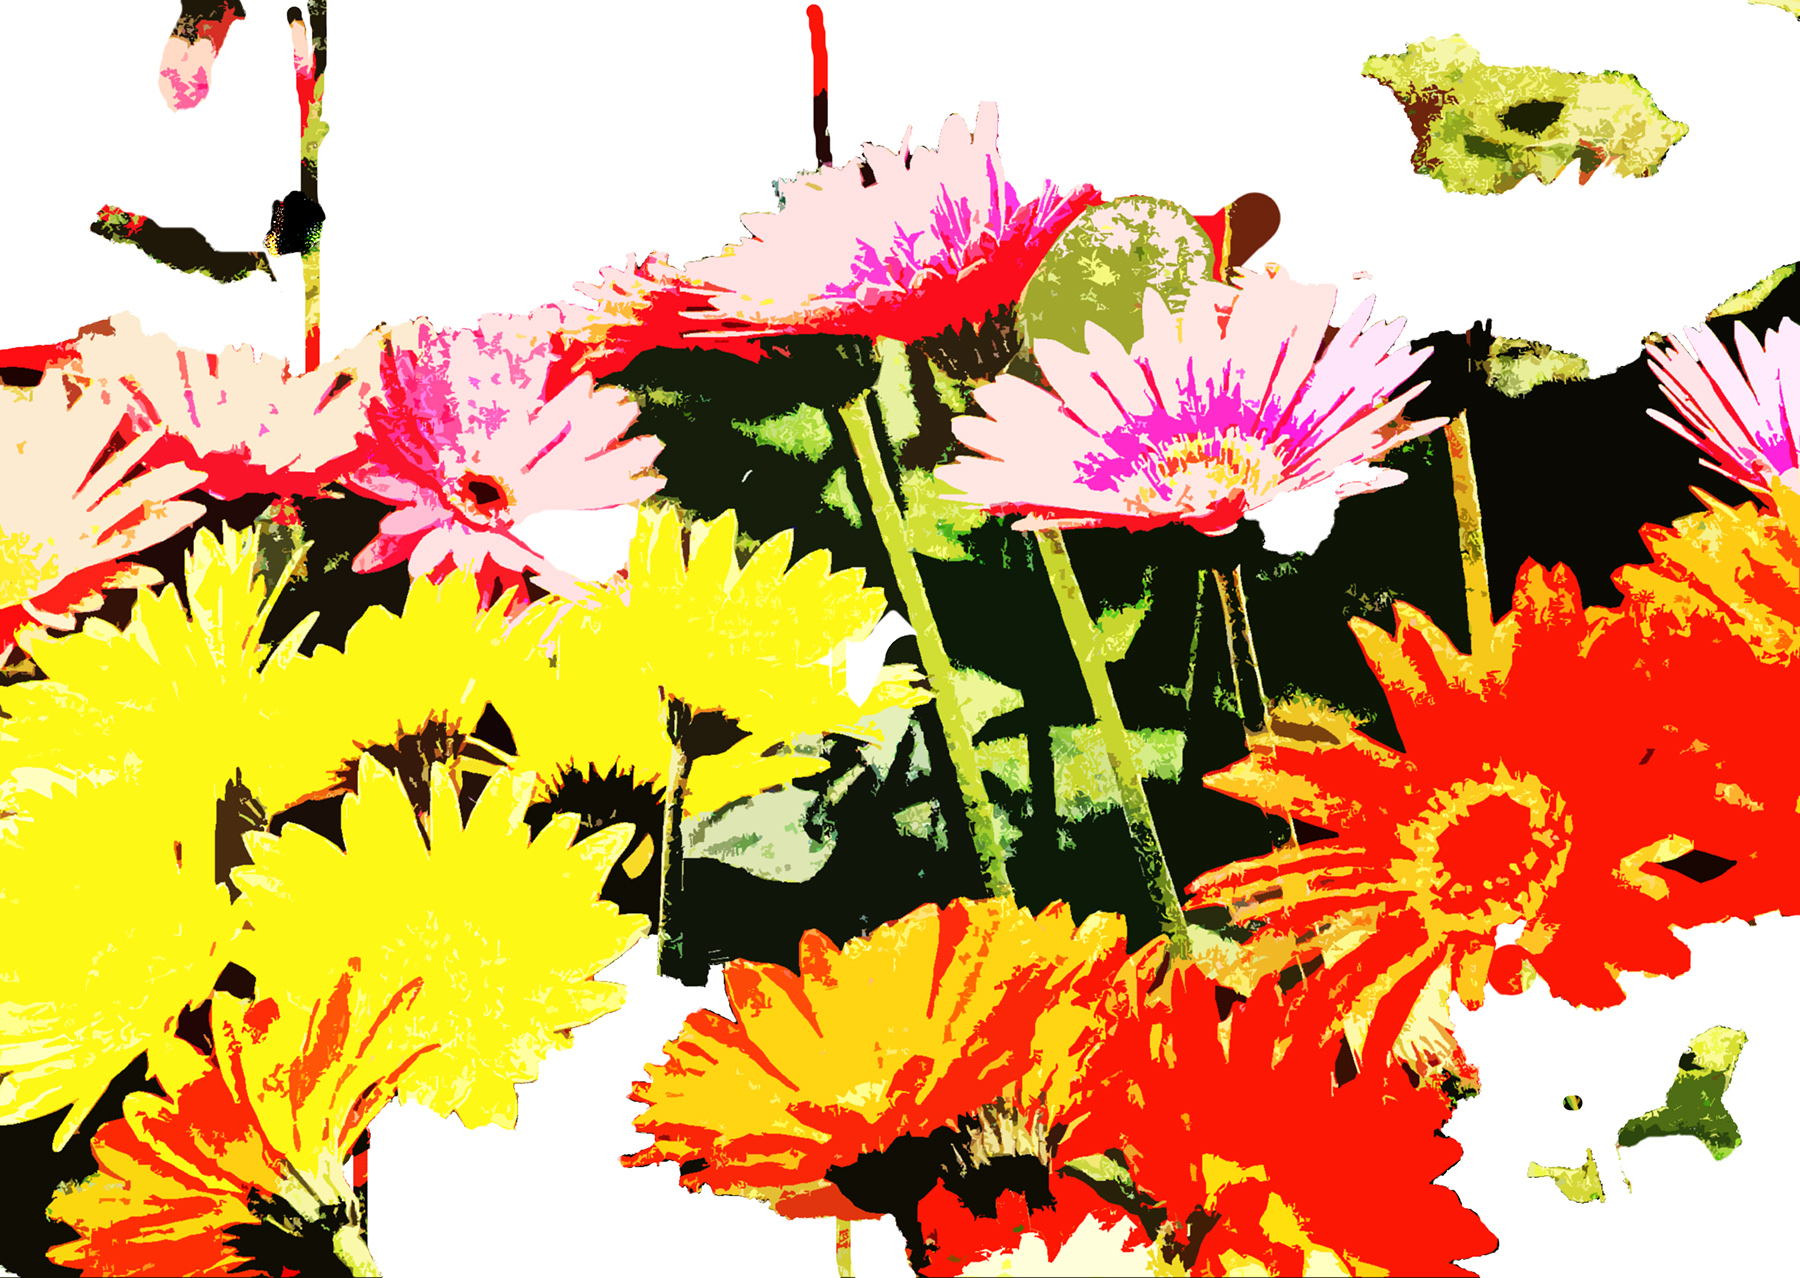  "Red Daisies" 15 x 22 inches, Digital Print on Handmade Paper $700. 